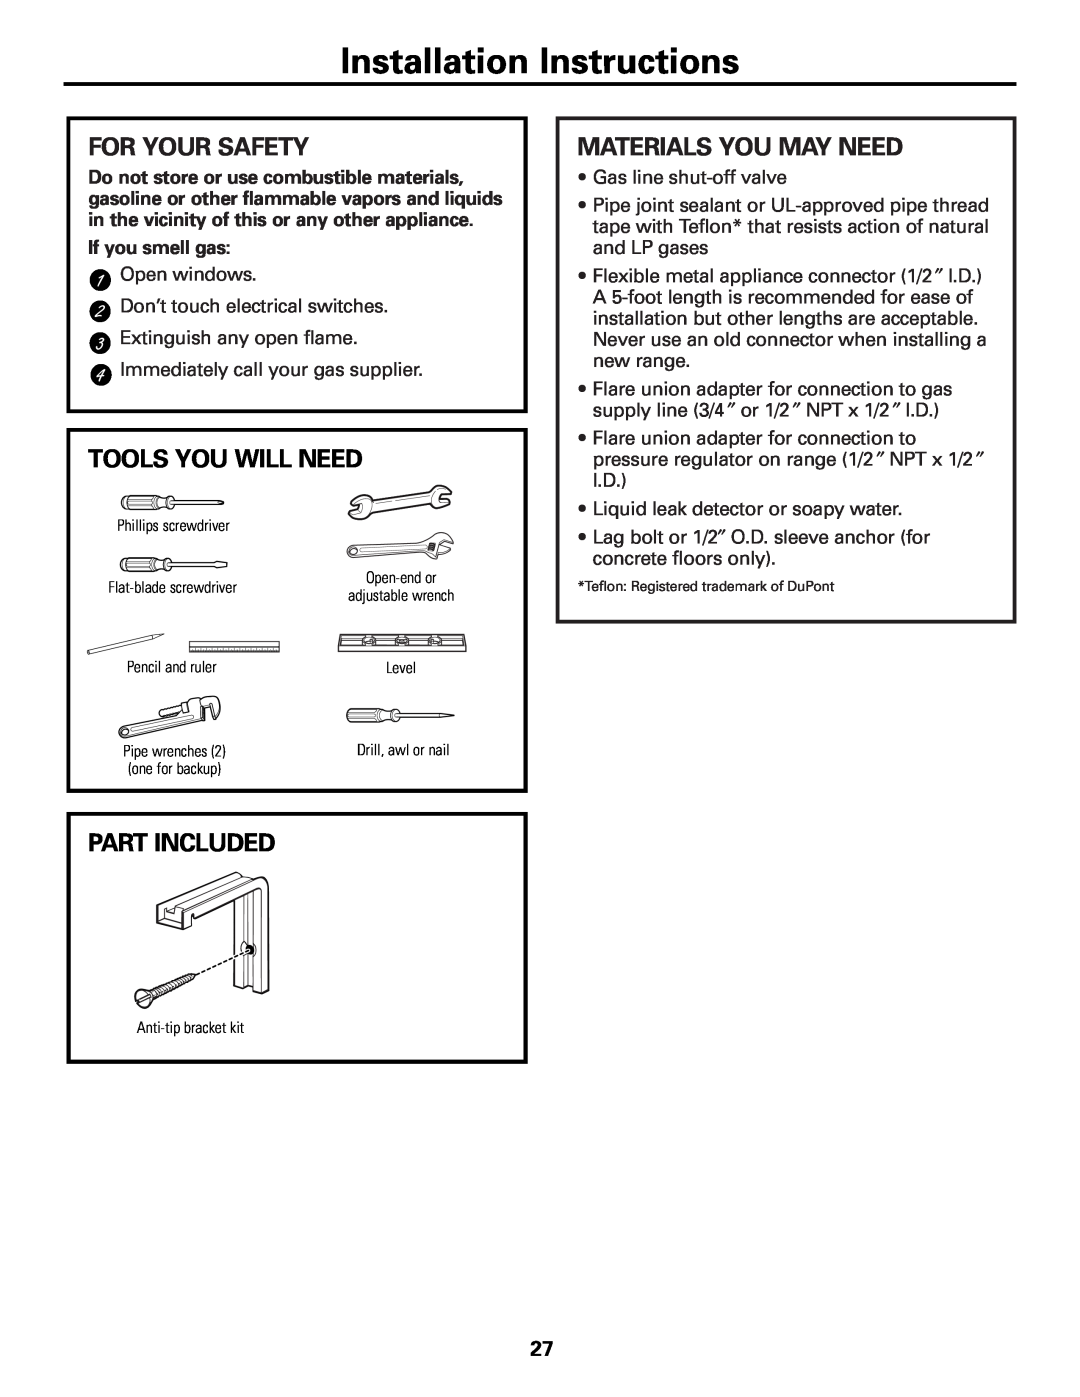 GE JGBS80 Installation Instructions, For Your Safety, Tools You Will Need, Part Included, Materials You May Need 